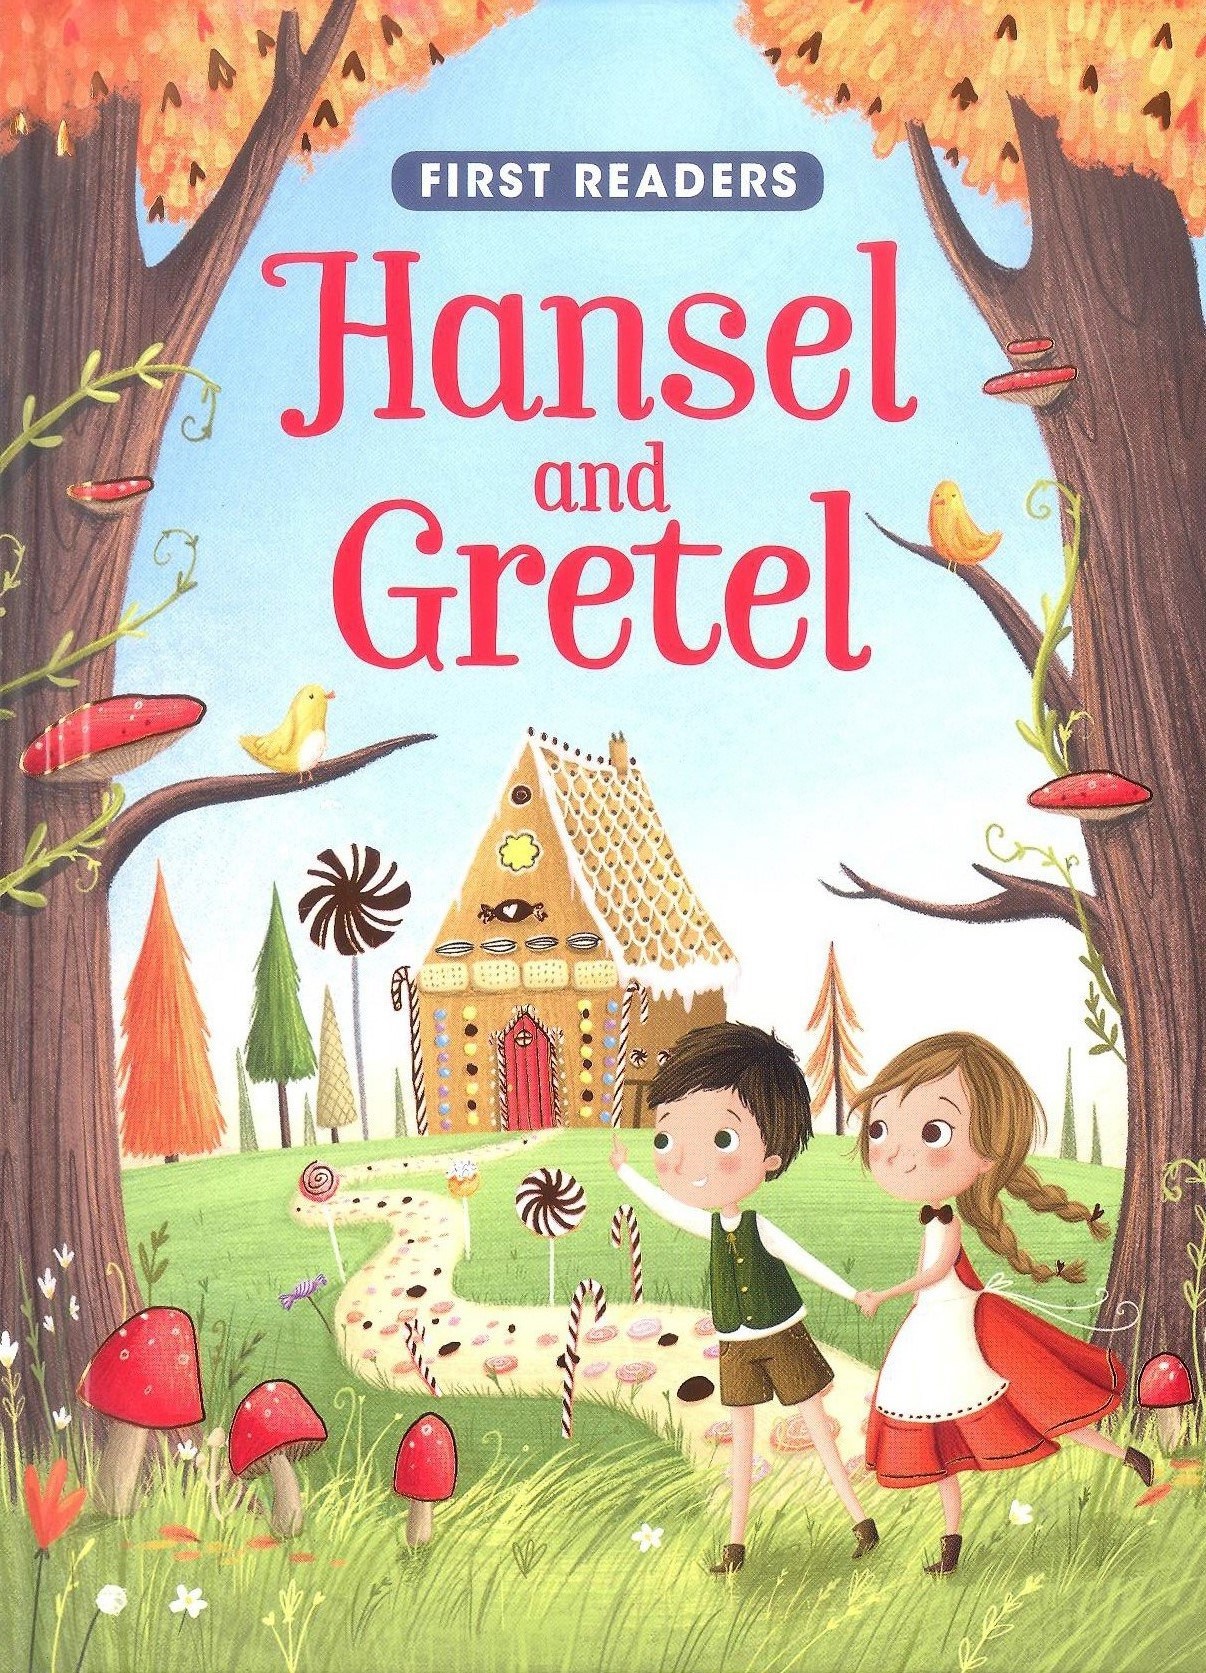 Hansel and Gretel (Brothers Grimm) | Heroes Wiki | FANDOM powered by Wikia